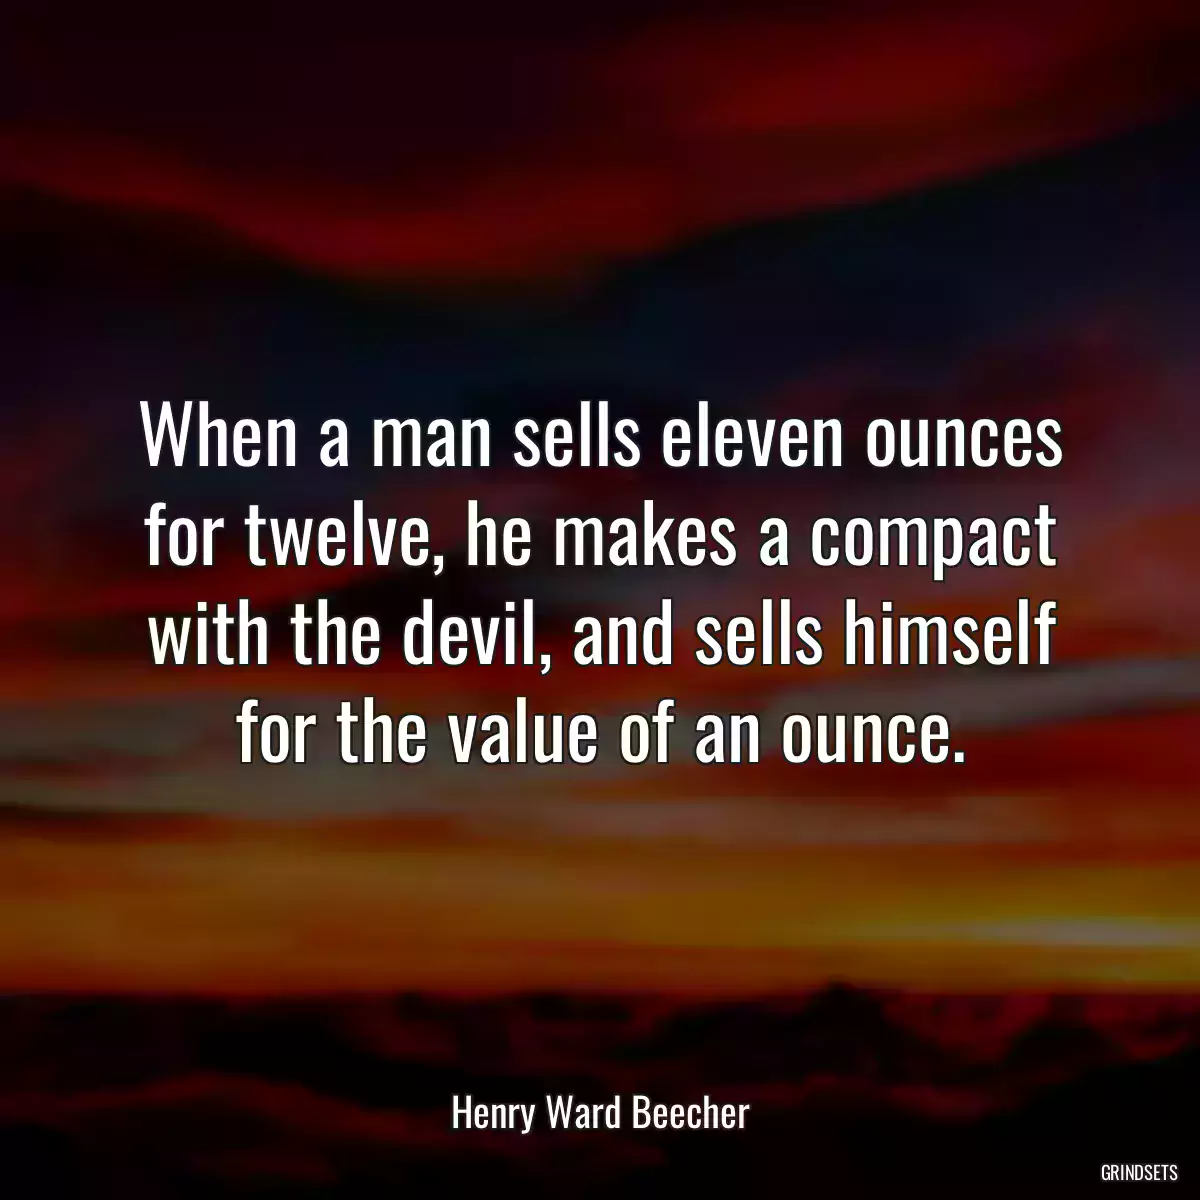 When a man sells eleven ounces for twelve, he makes a compact with the devil, and sells himself for the value of an ounce.